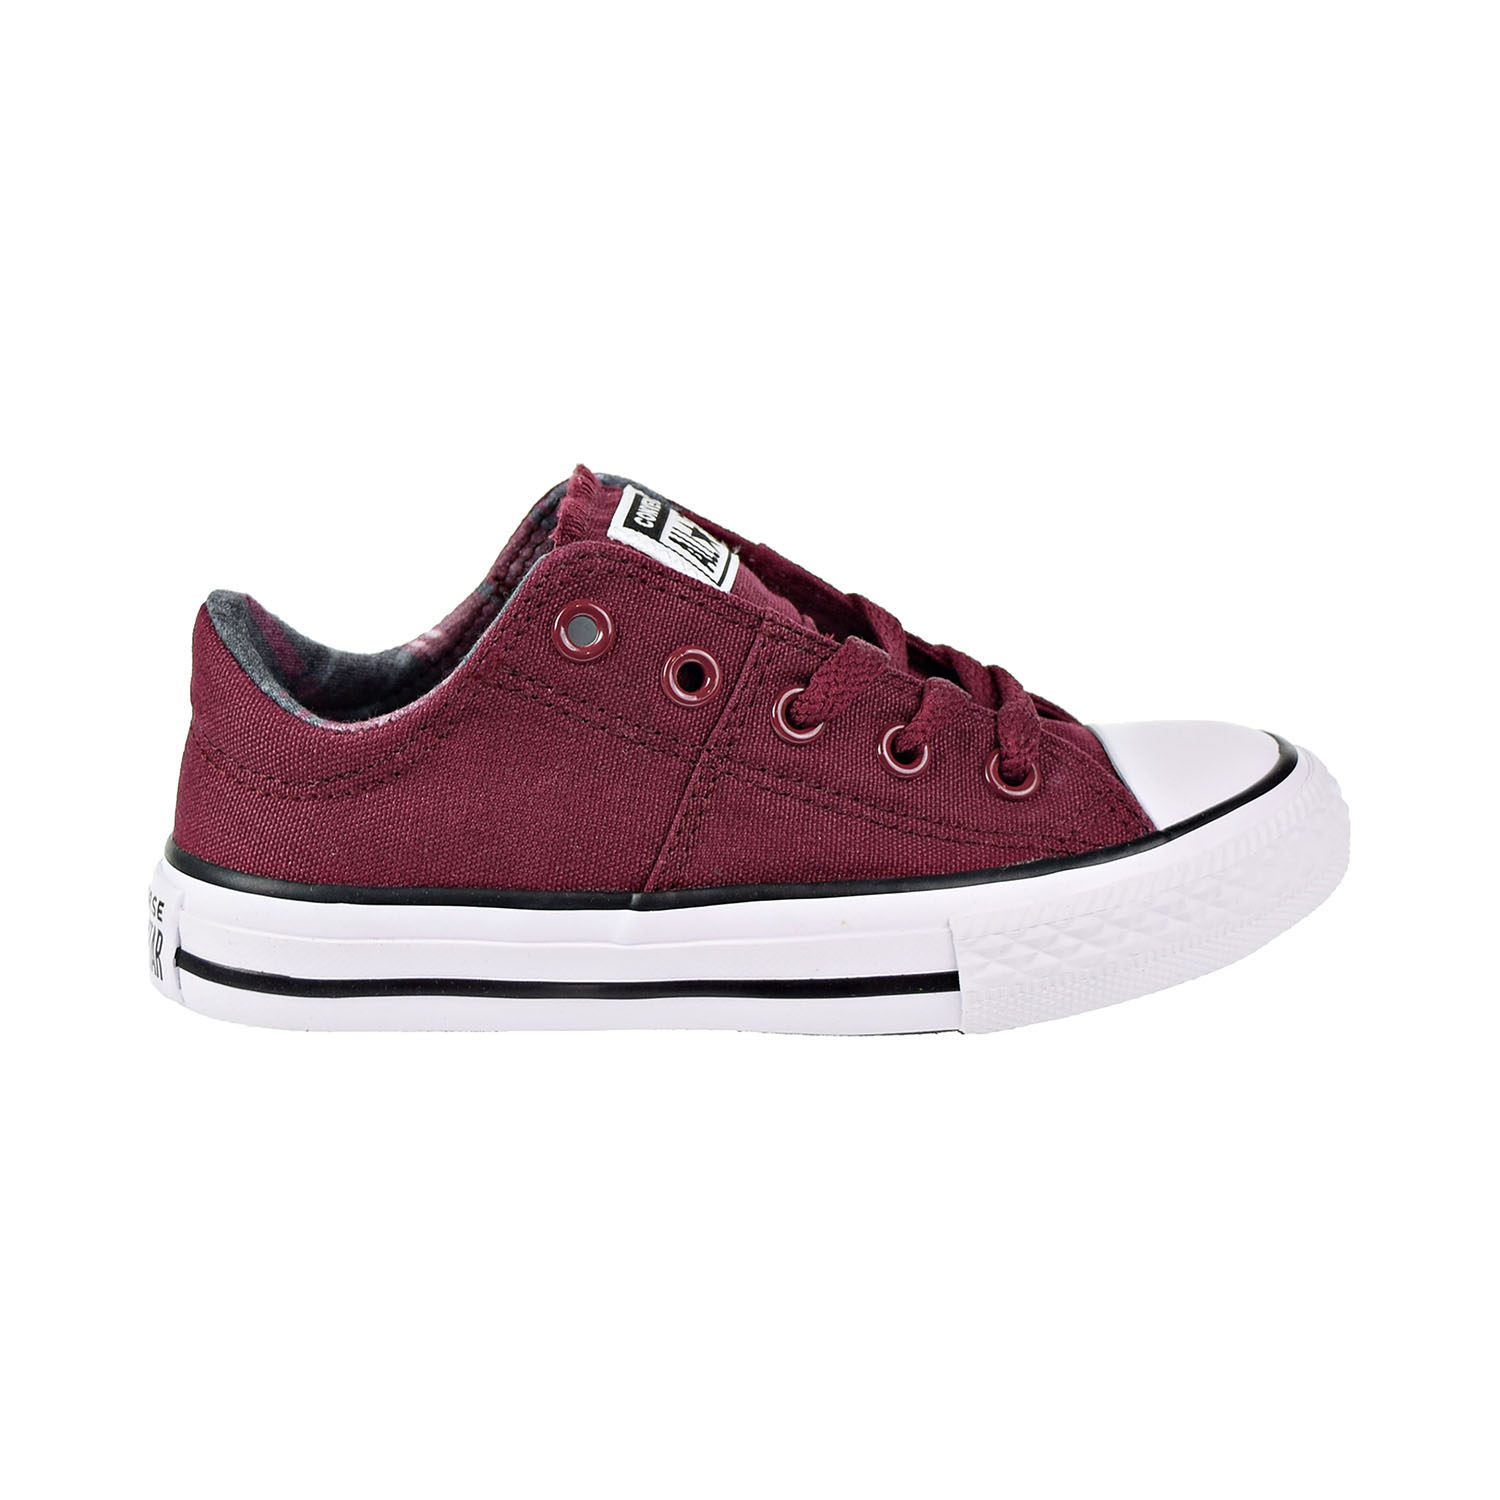 Converse Chuck Taylor All Star Madison Ox Little Kids/Big Kids Shoes Burgundy 661912f - image 1 of 6